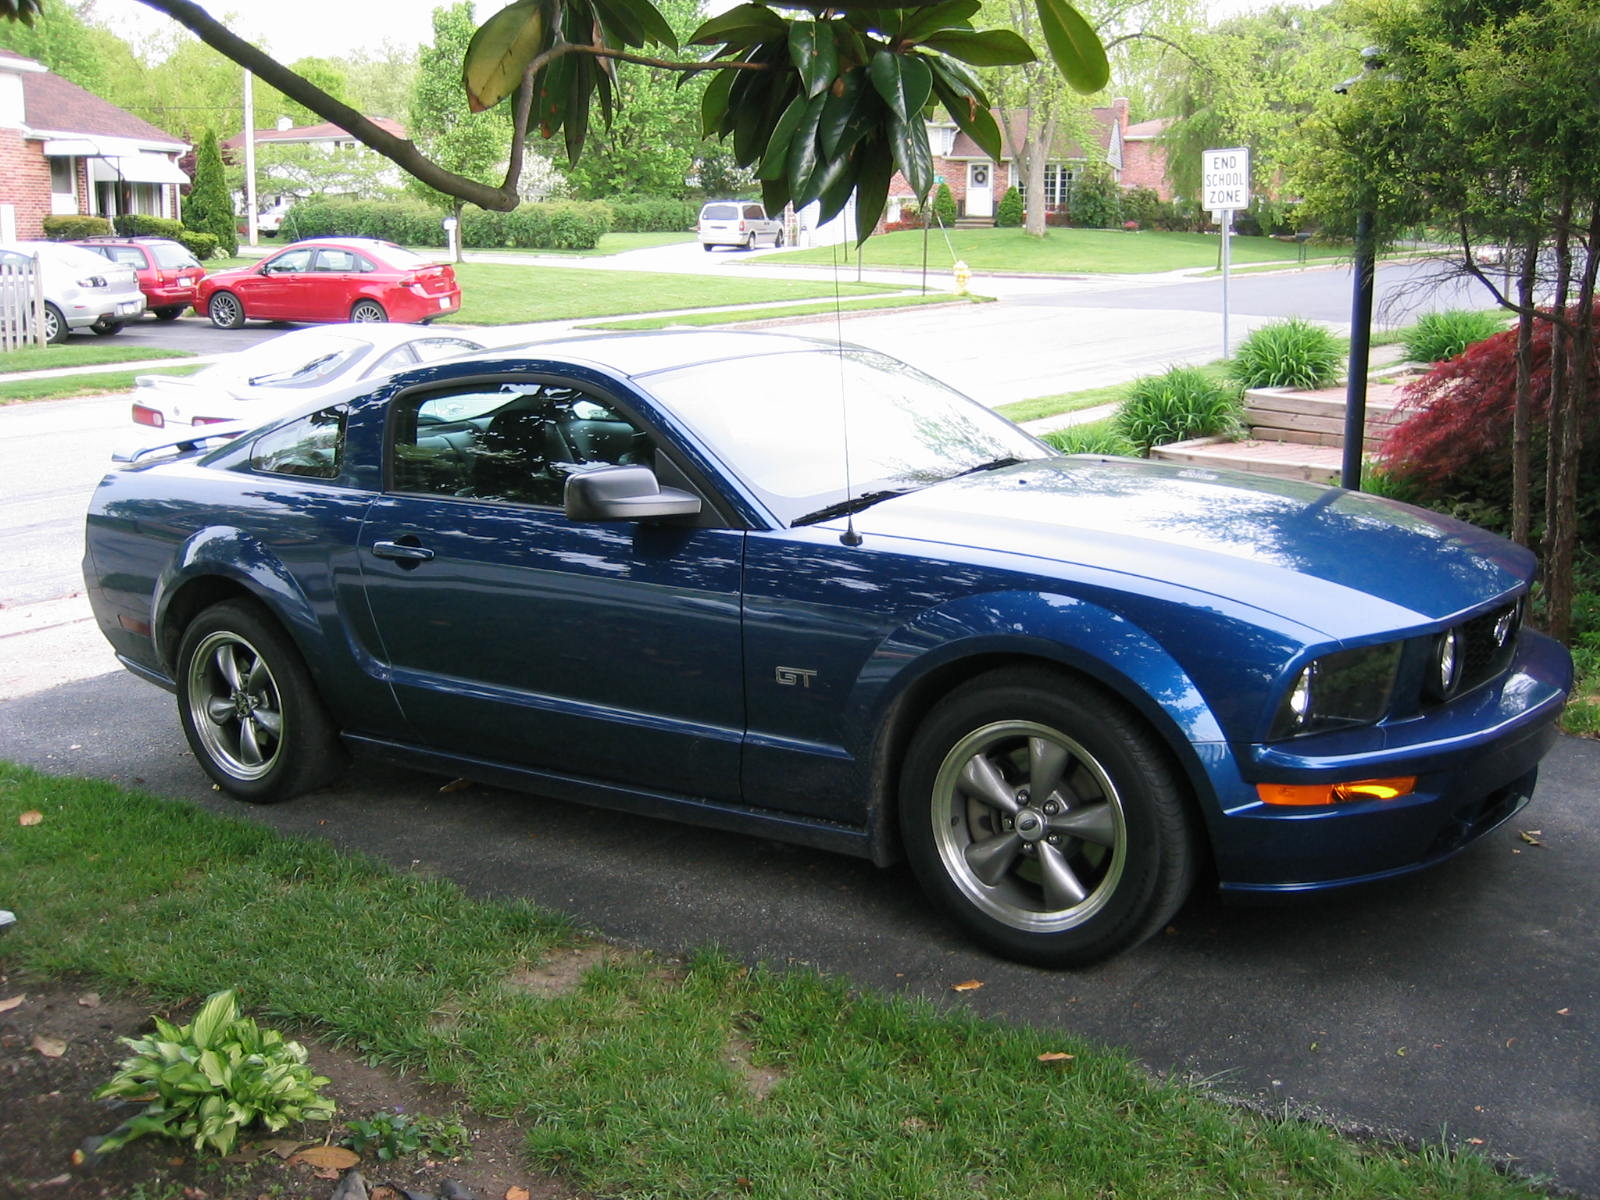 2006 Ford mustang gt 0-60 times #9